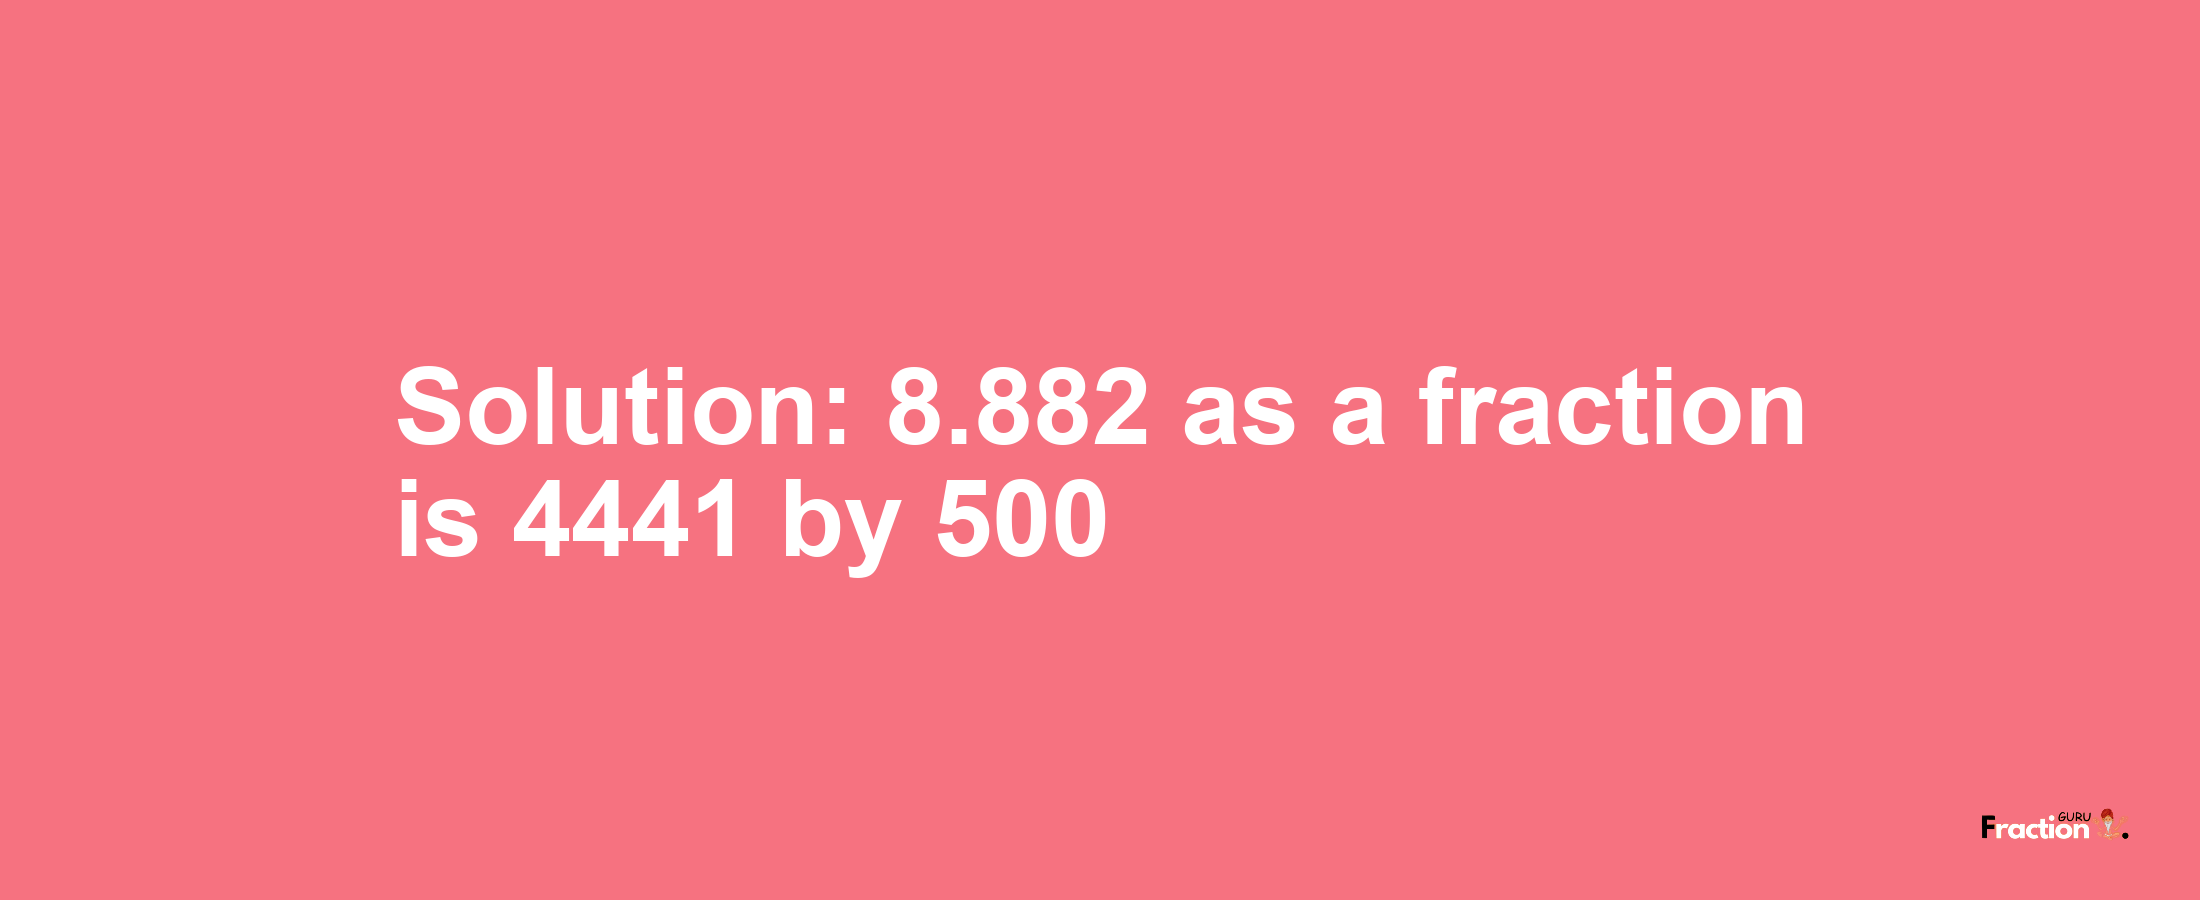 Solution:8.882 as a fraction is 4441/500